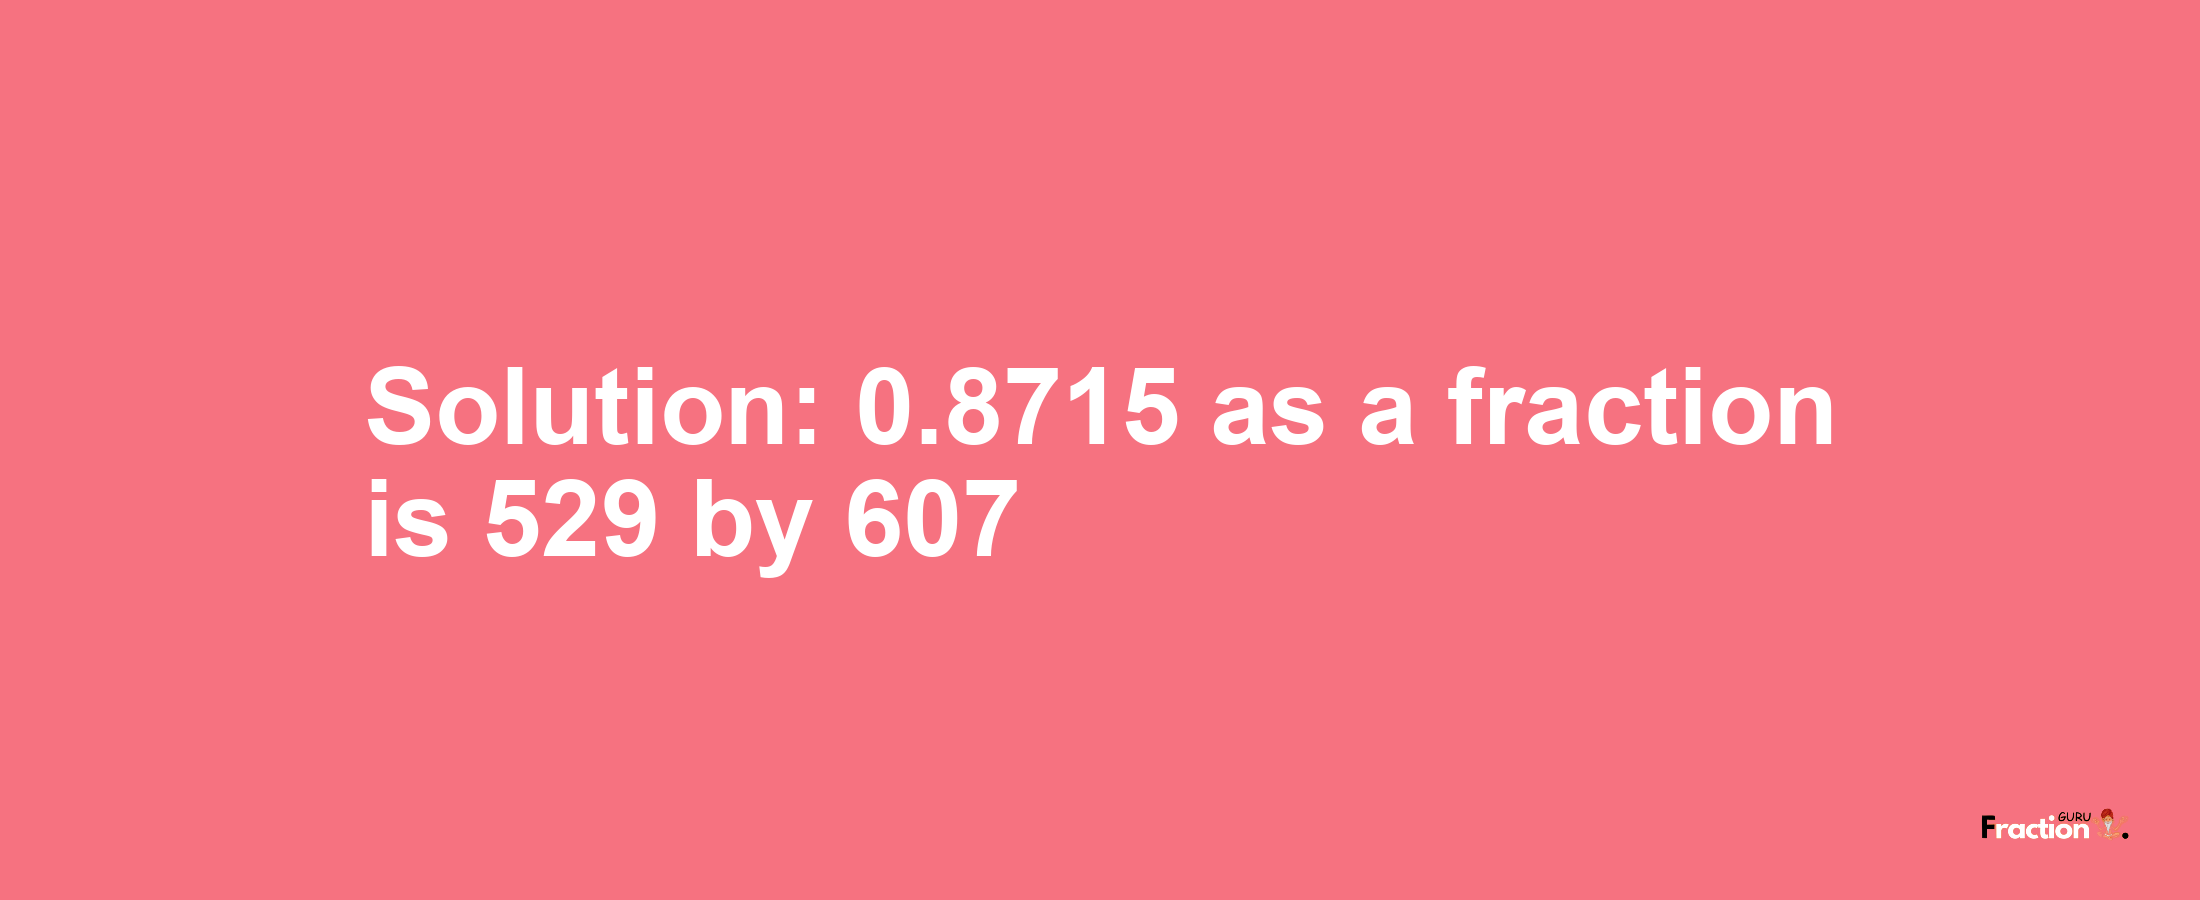 Solution:0.8715 as a fraction is 529/607